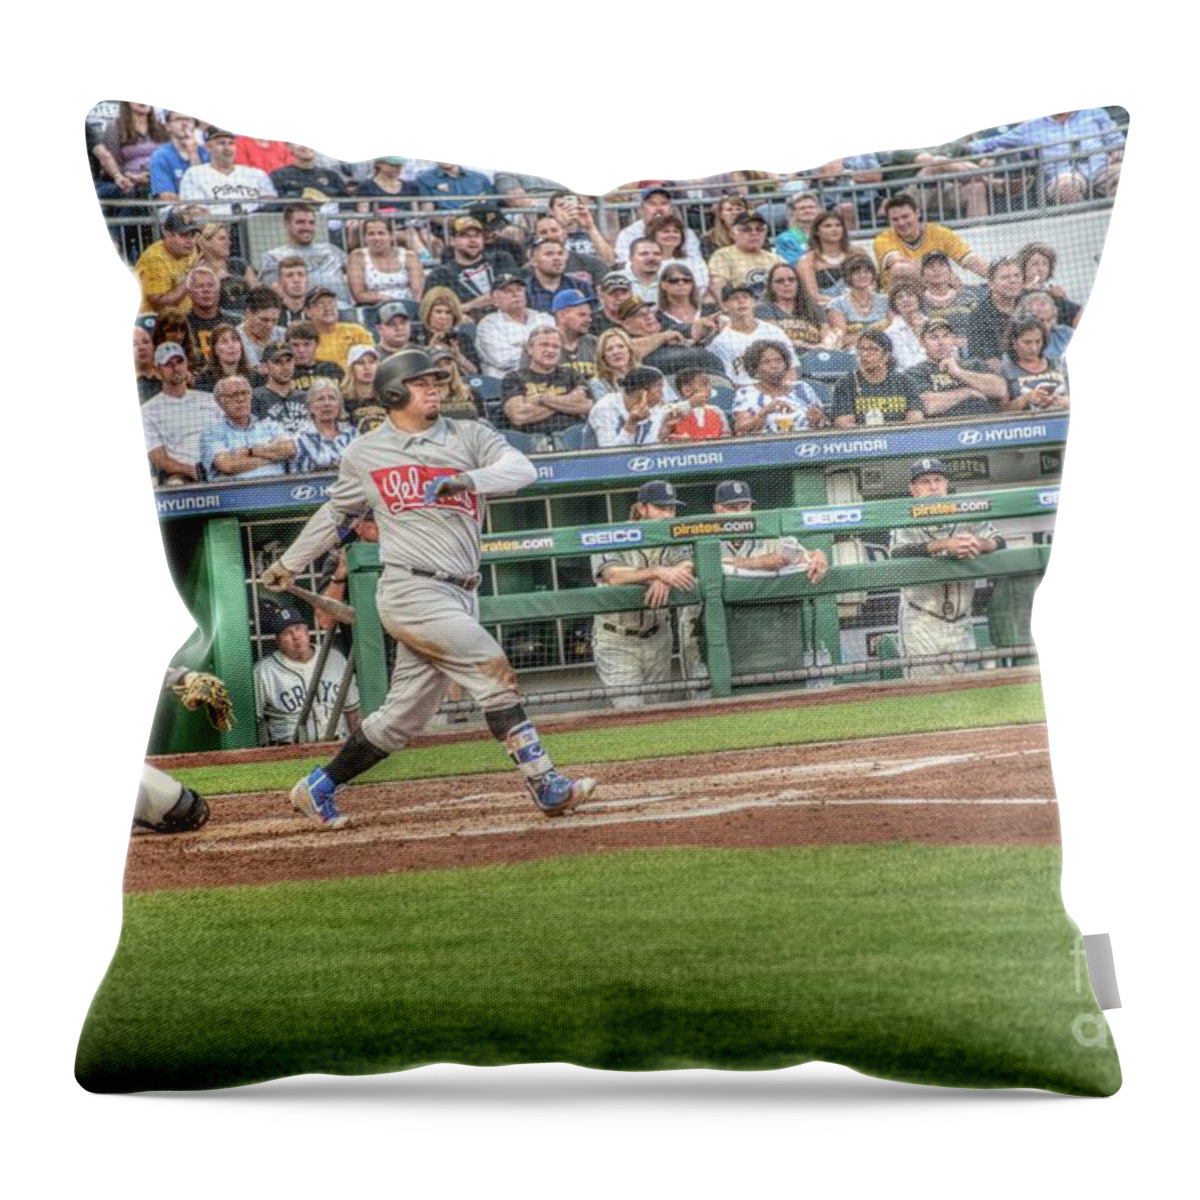 Kyle Throw Pillow featuring the photograph Kyle Schwarber #1 by David Bearden